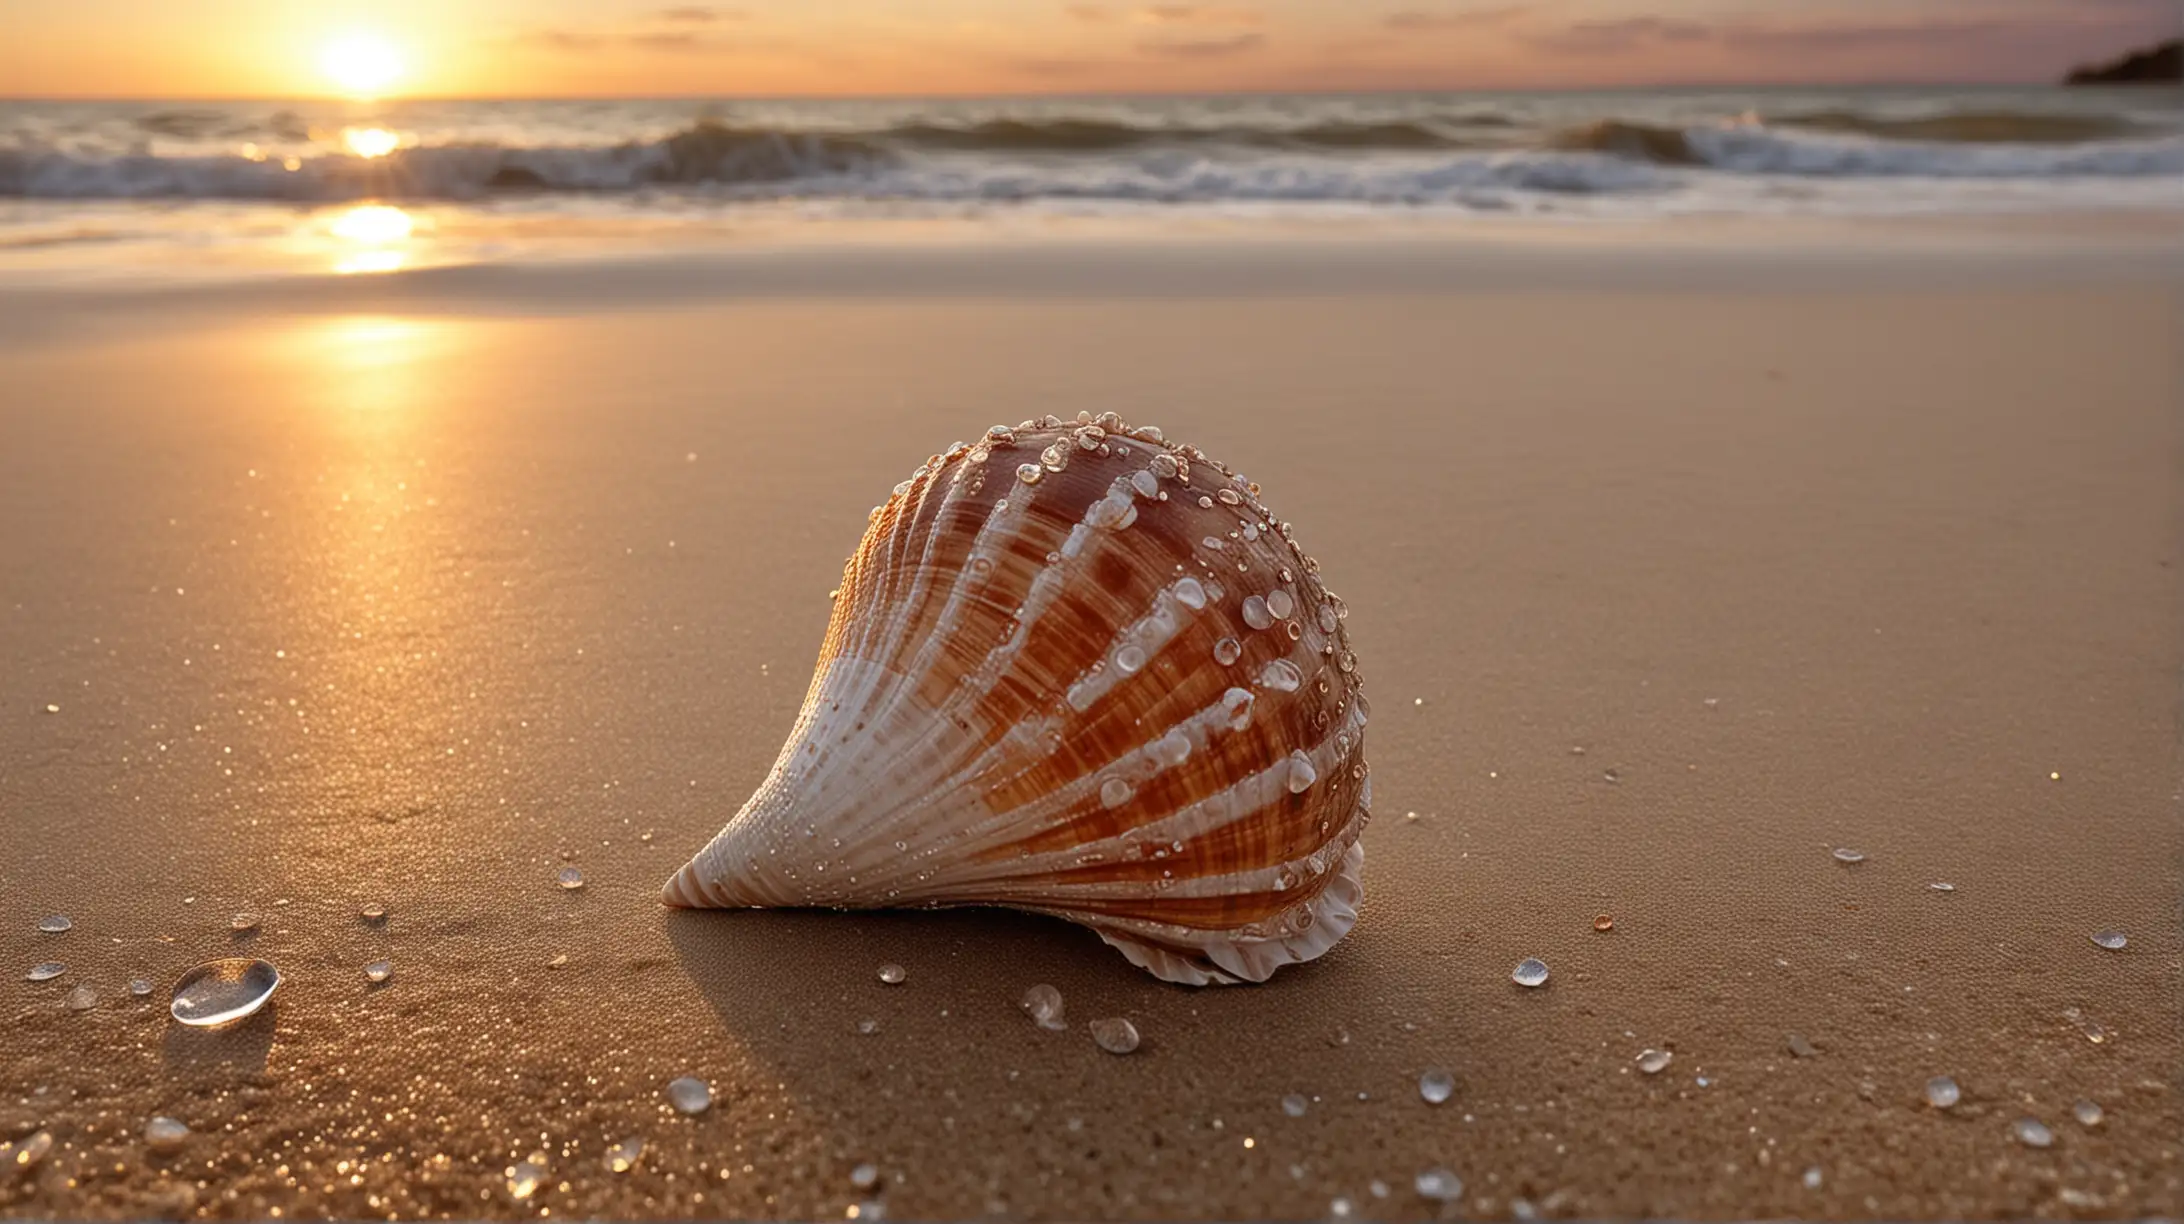 a seashell on a sandy beach. The seashell stands upright, revealing its intricate ridges and texture. Water droplets cling to the shell’s surface, suggesting that it is wet. In the background, the sun sets over the ocean horizon, casting a warm glow on the wet sand surrounding the shell. The juxtaposition of the delicate shell against the vastness of the ocean and sky creates a serene and captivating; MACRO
PHOTOGRAPHY